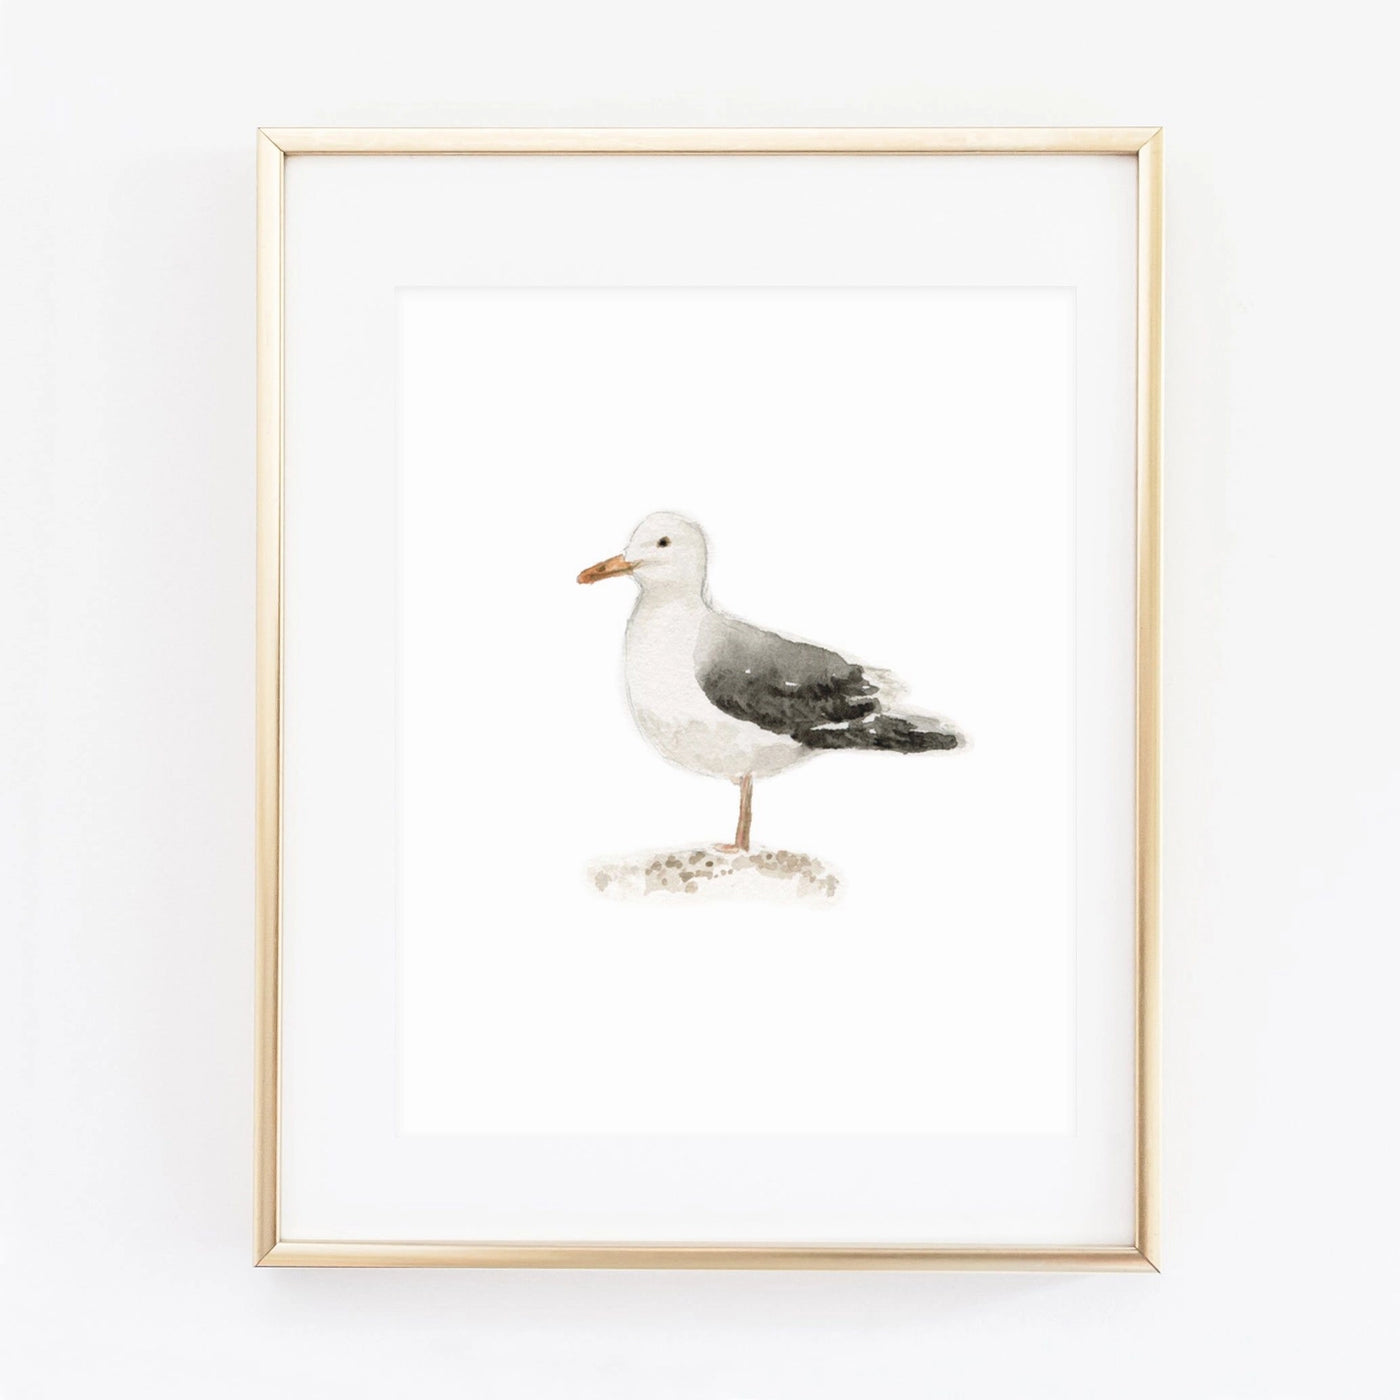 Seagull watercolor print simple quality coastal New England housewarming gift new home Modern smart causal female chic effortless outfit womens ladies gift elegant effortless clothing everyday stylish clothes apparel outfits chic winter fall autumn professional style women’s boutique trendy teacher office cute outfit boutique clothes fashion quality work from home neutral wardrobe essential basics lounge athleisure gift for her midsize curvy sizes 